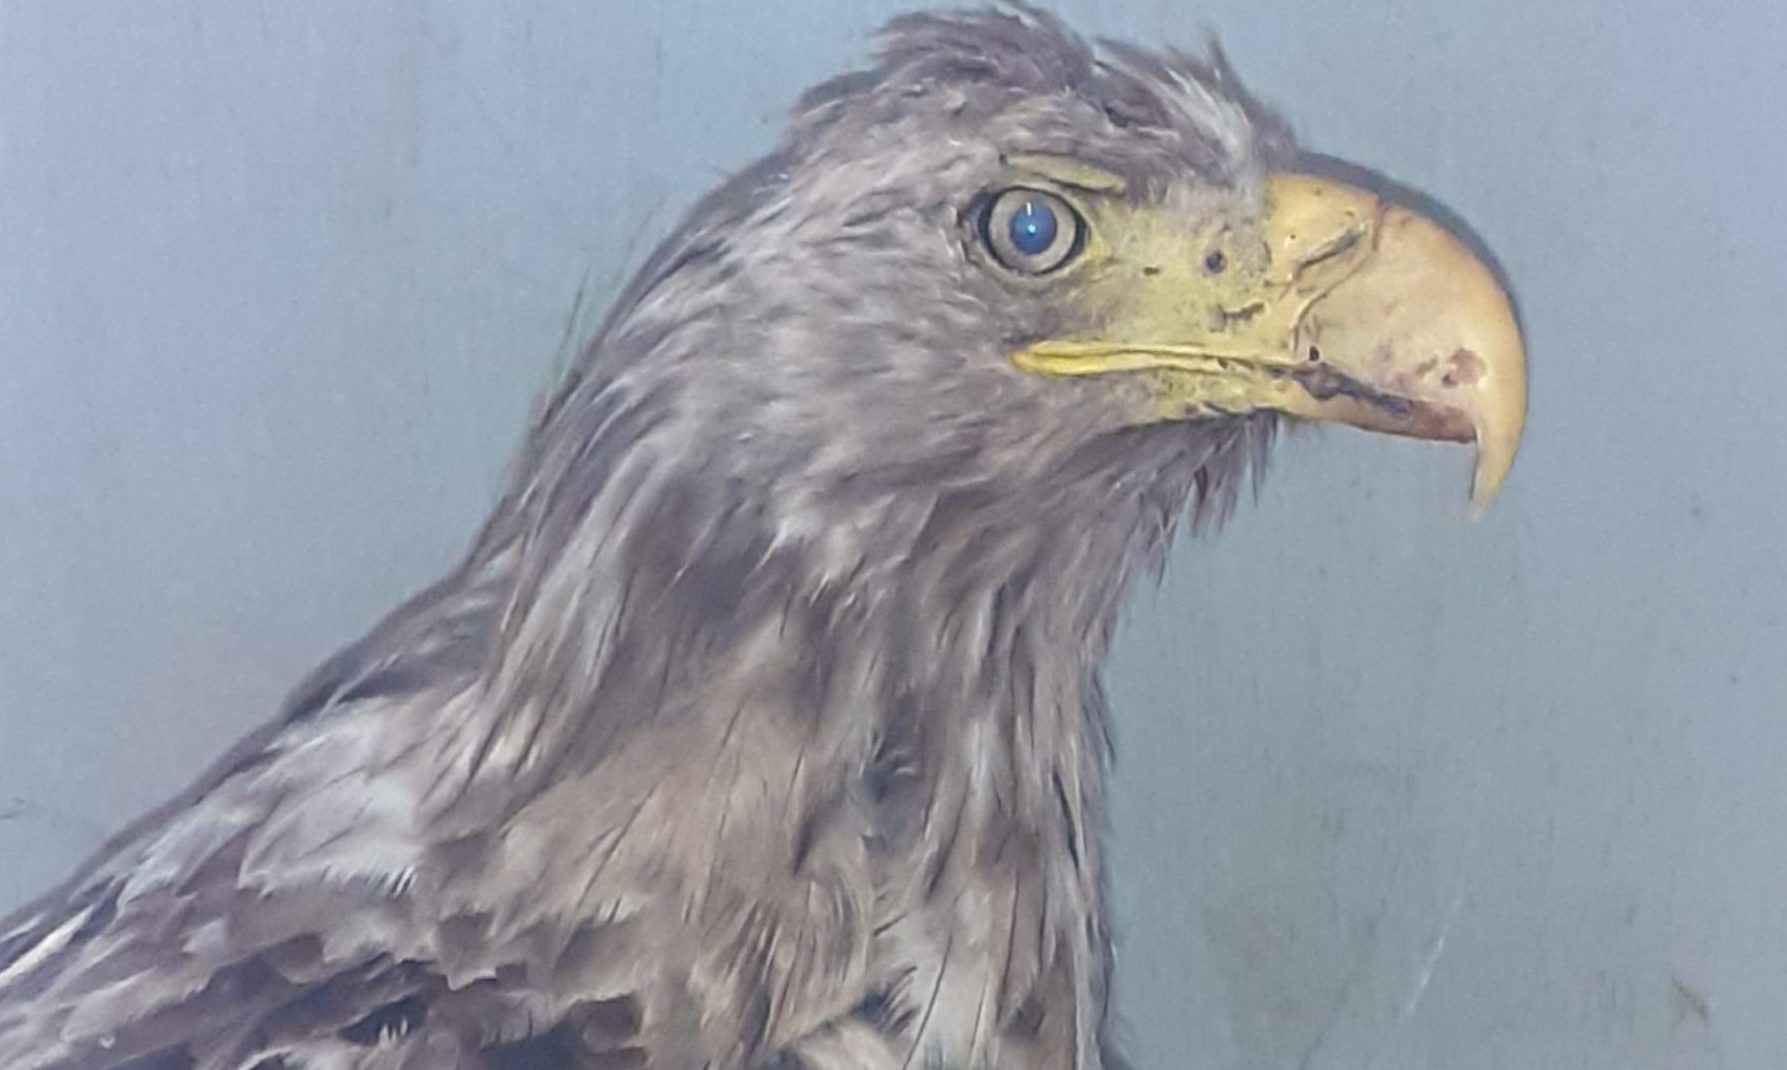 Sea eagle was saved by the Scottish SPCA on Isle of Lewis.